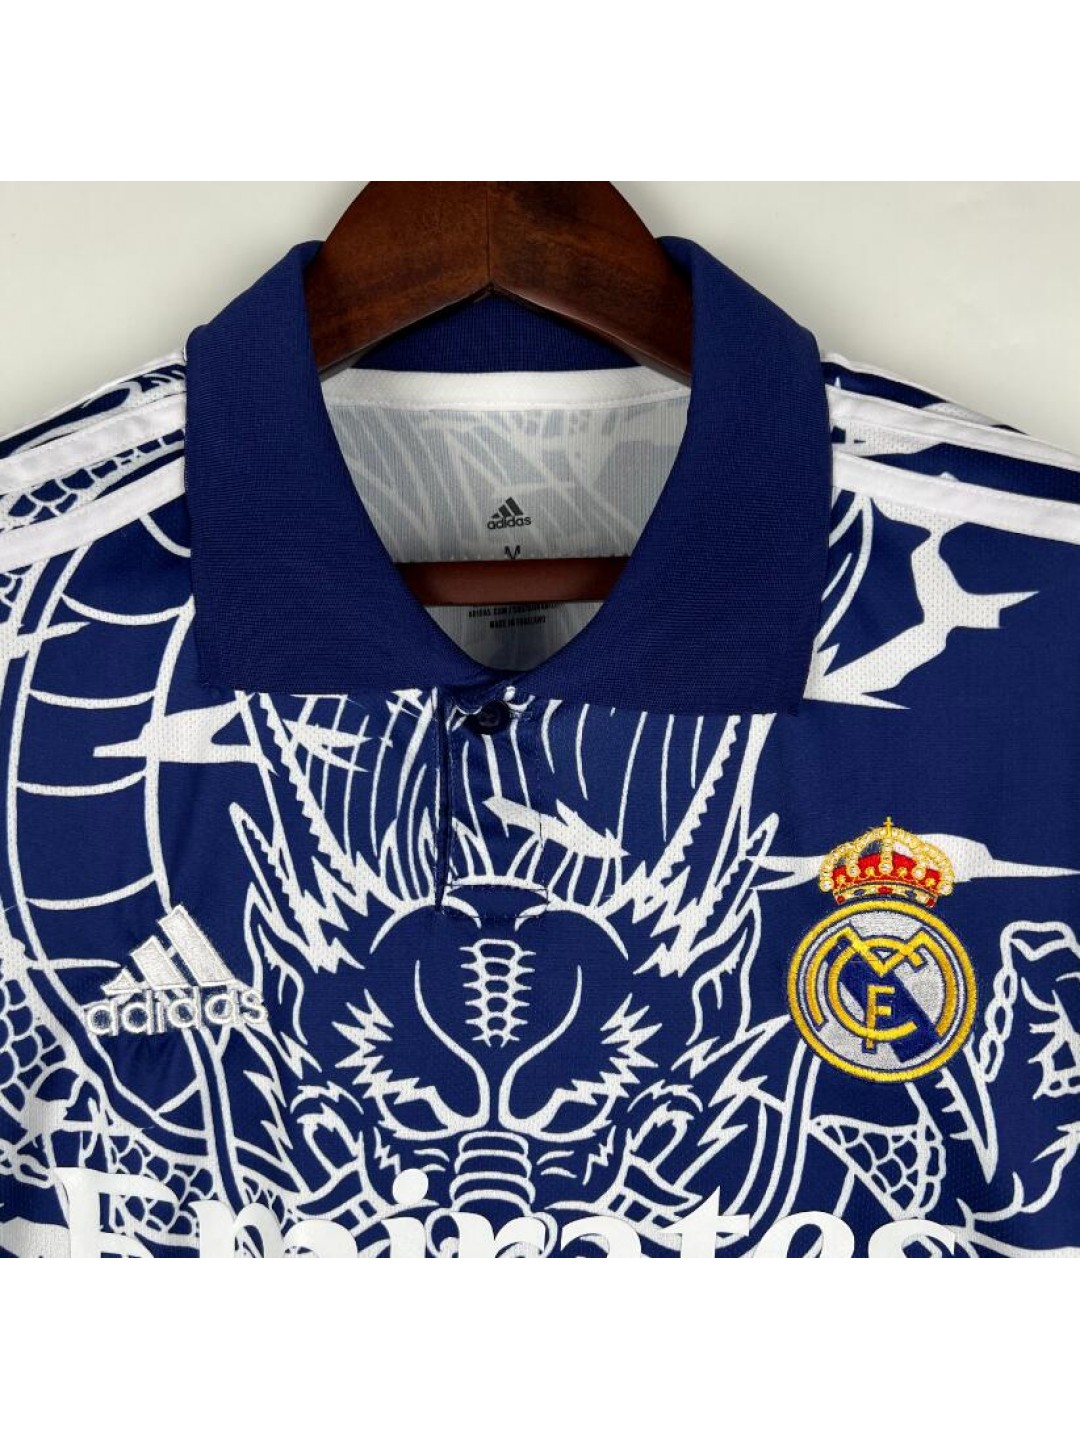 Camiseta Real Madrid Special Edition 23/24 [RM454263] - €29.00 